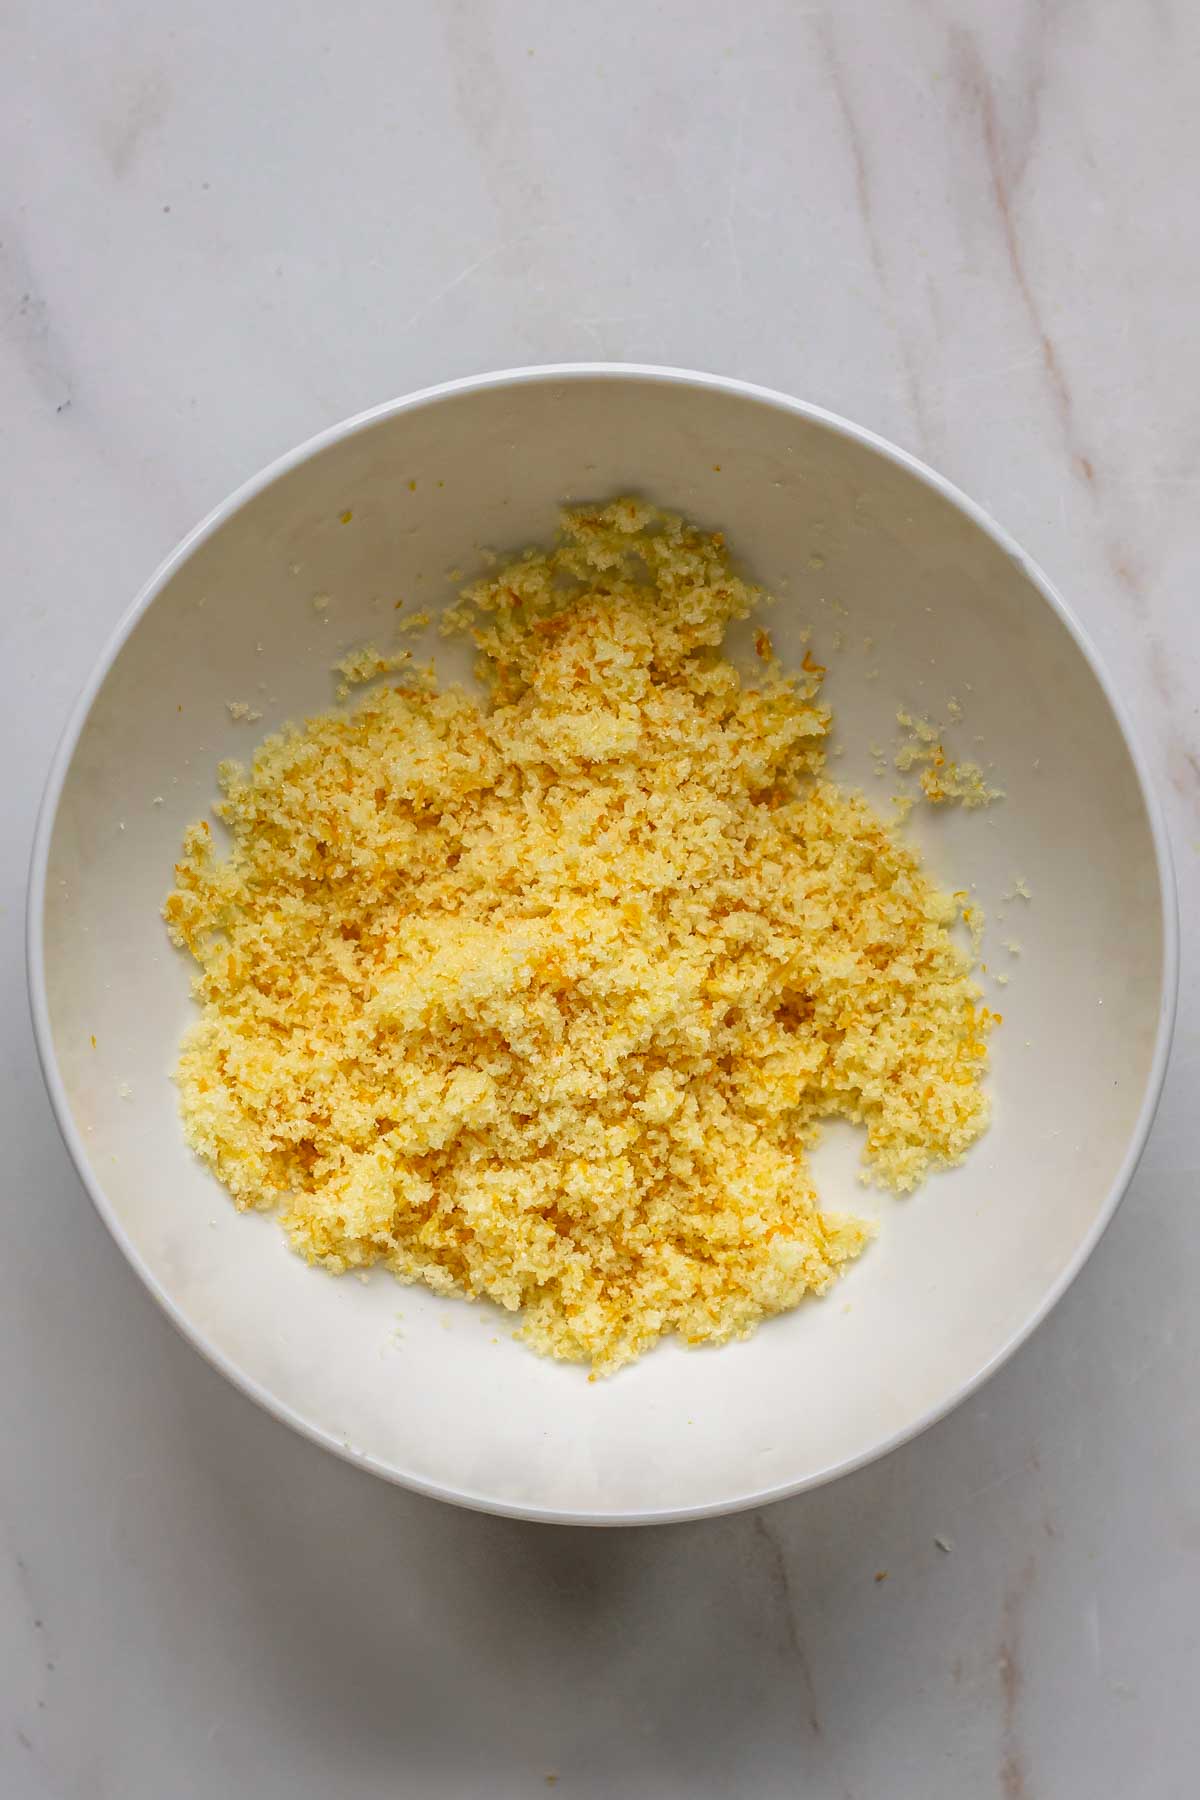 Orange zest and sugar mixed together in a bowl.